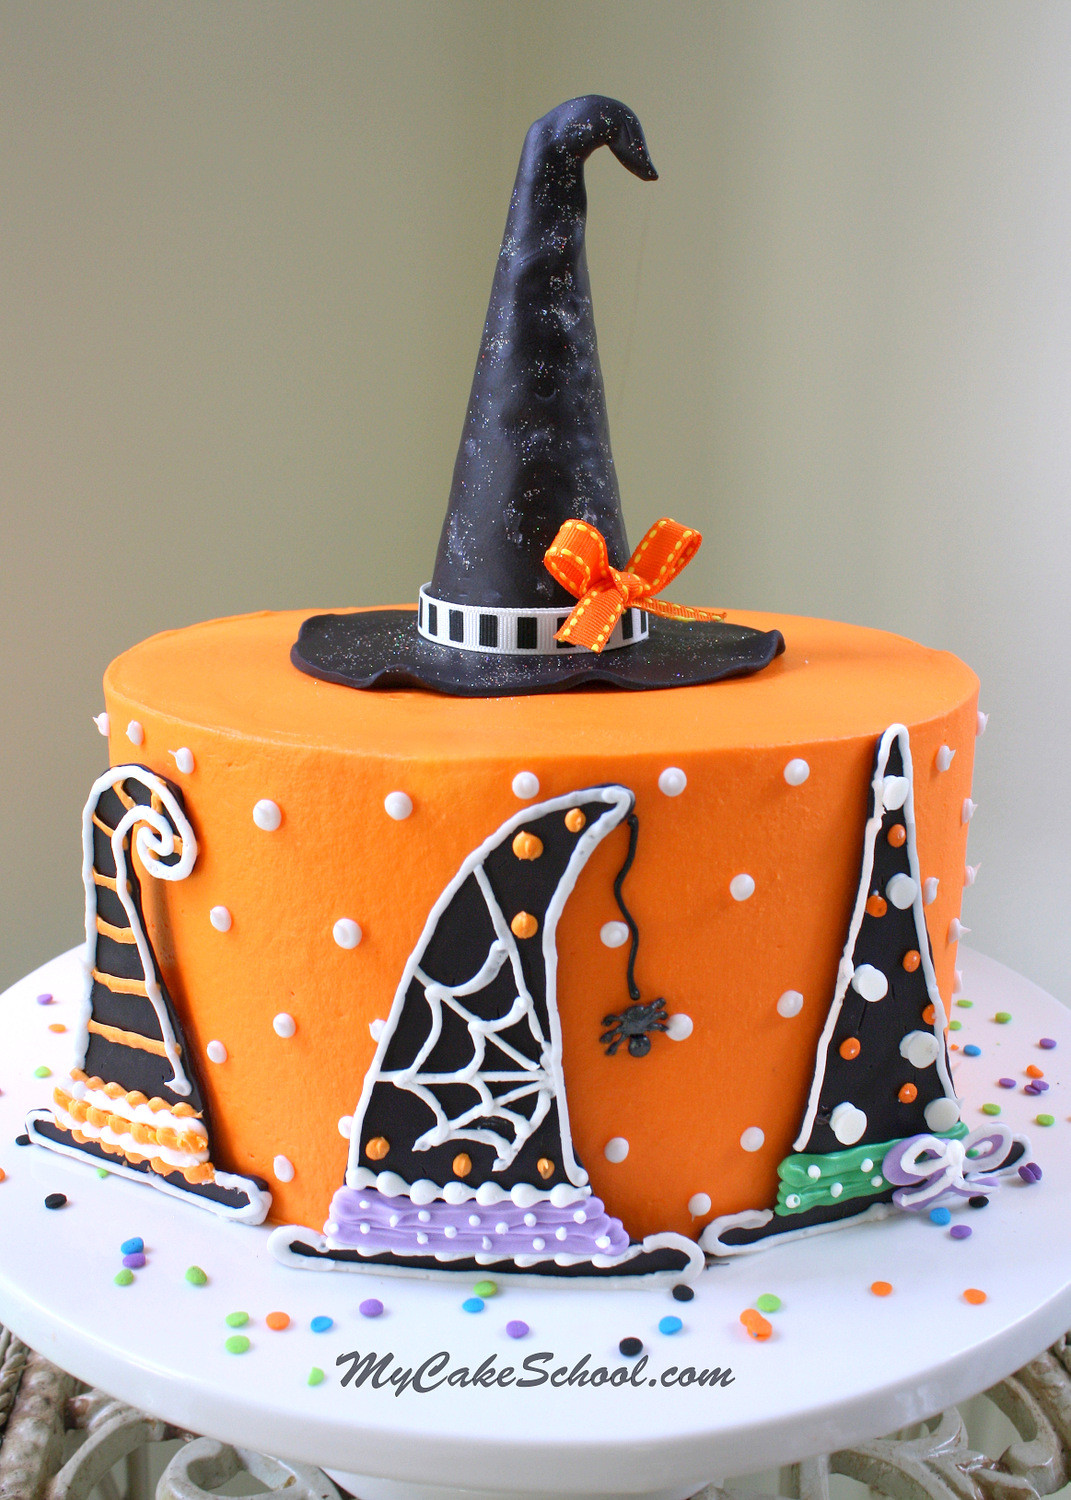 Halloween Themed Birthday Cakes
 Witch Hats A Halloween Cake Decorating Tutorial